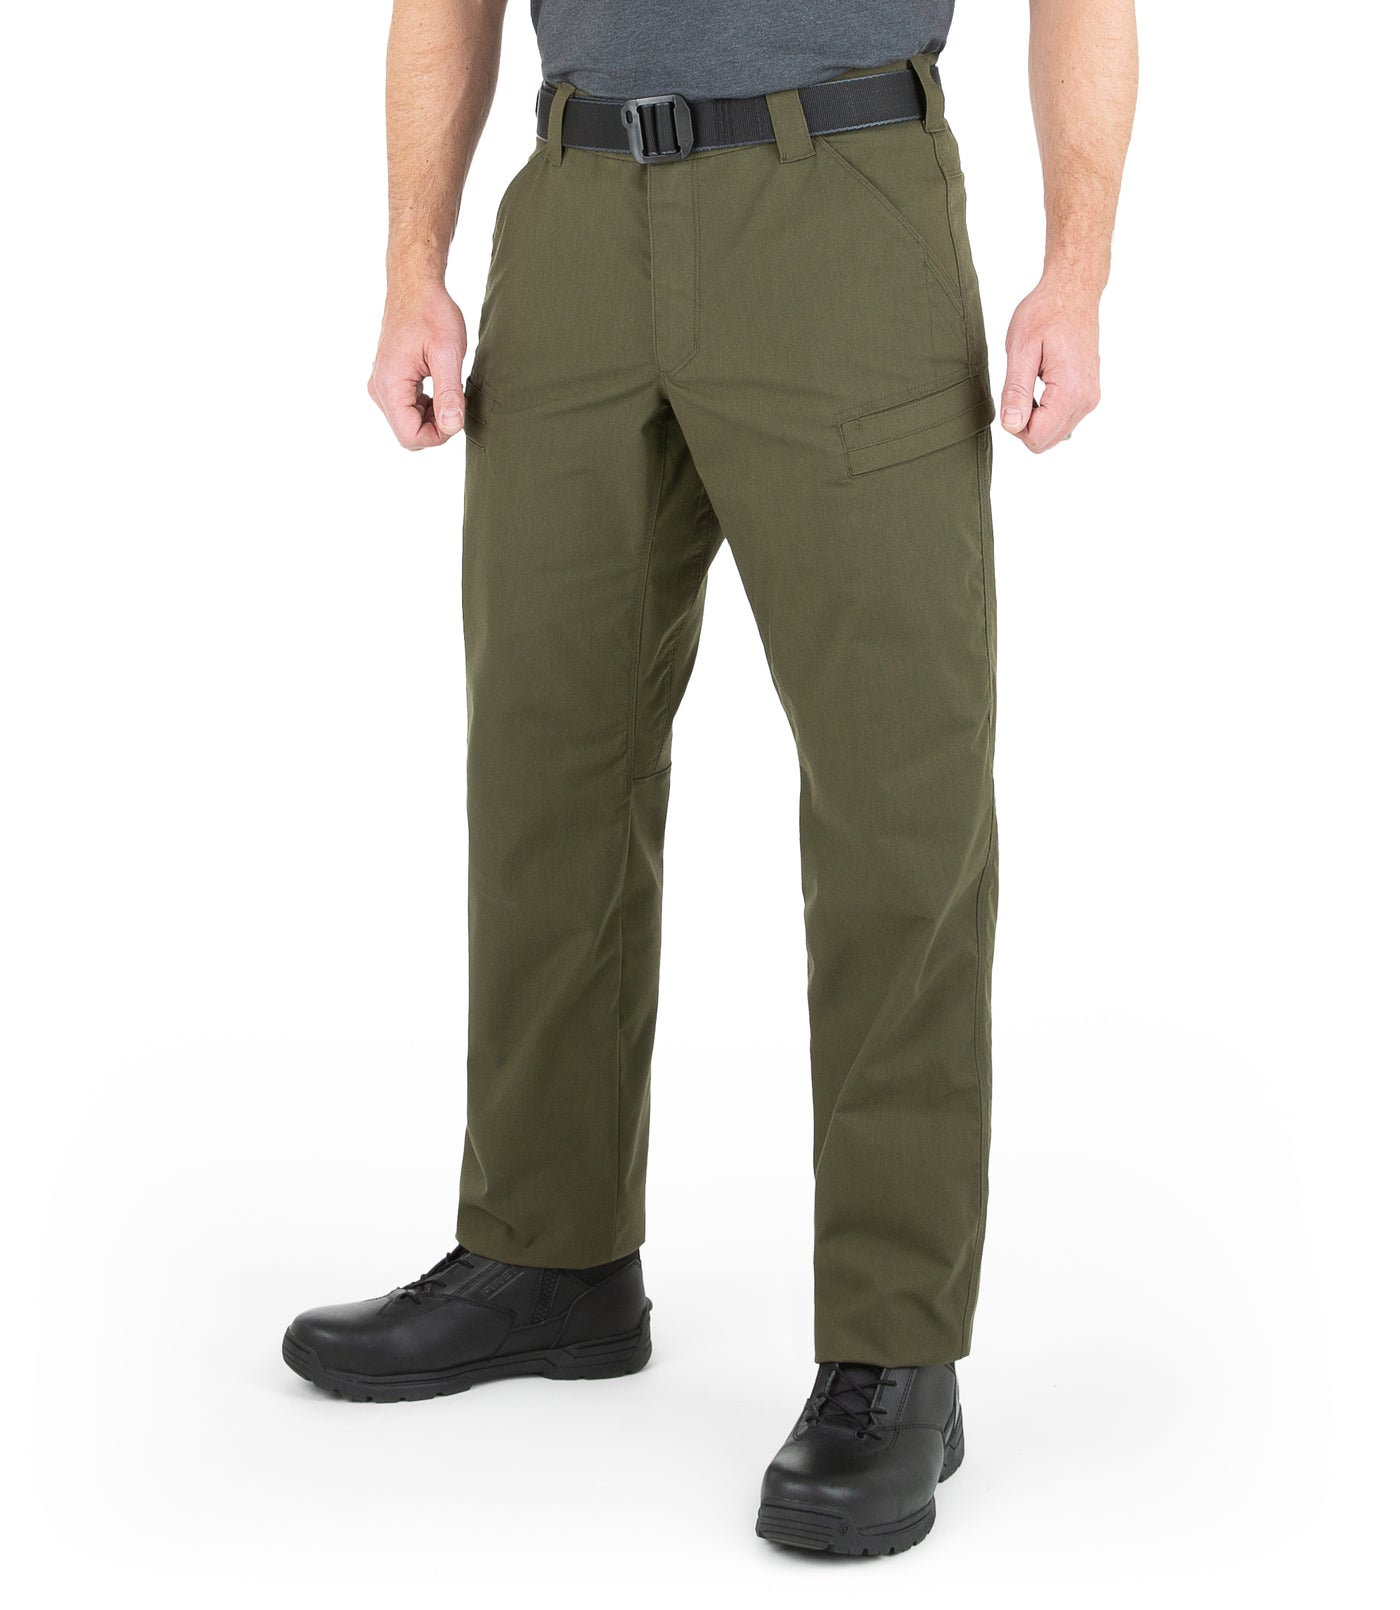 Men's A2 Pant / OD Green – First Tactical